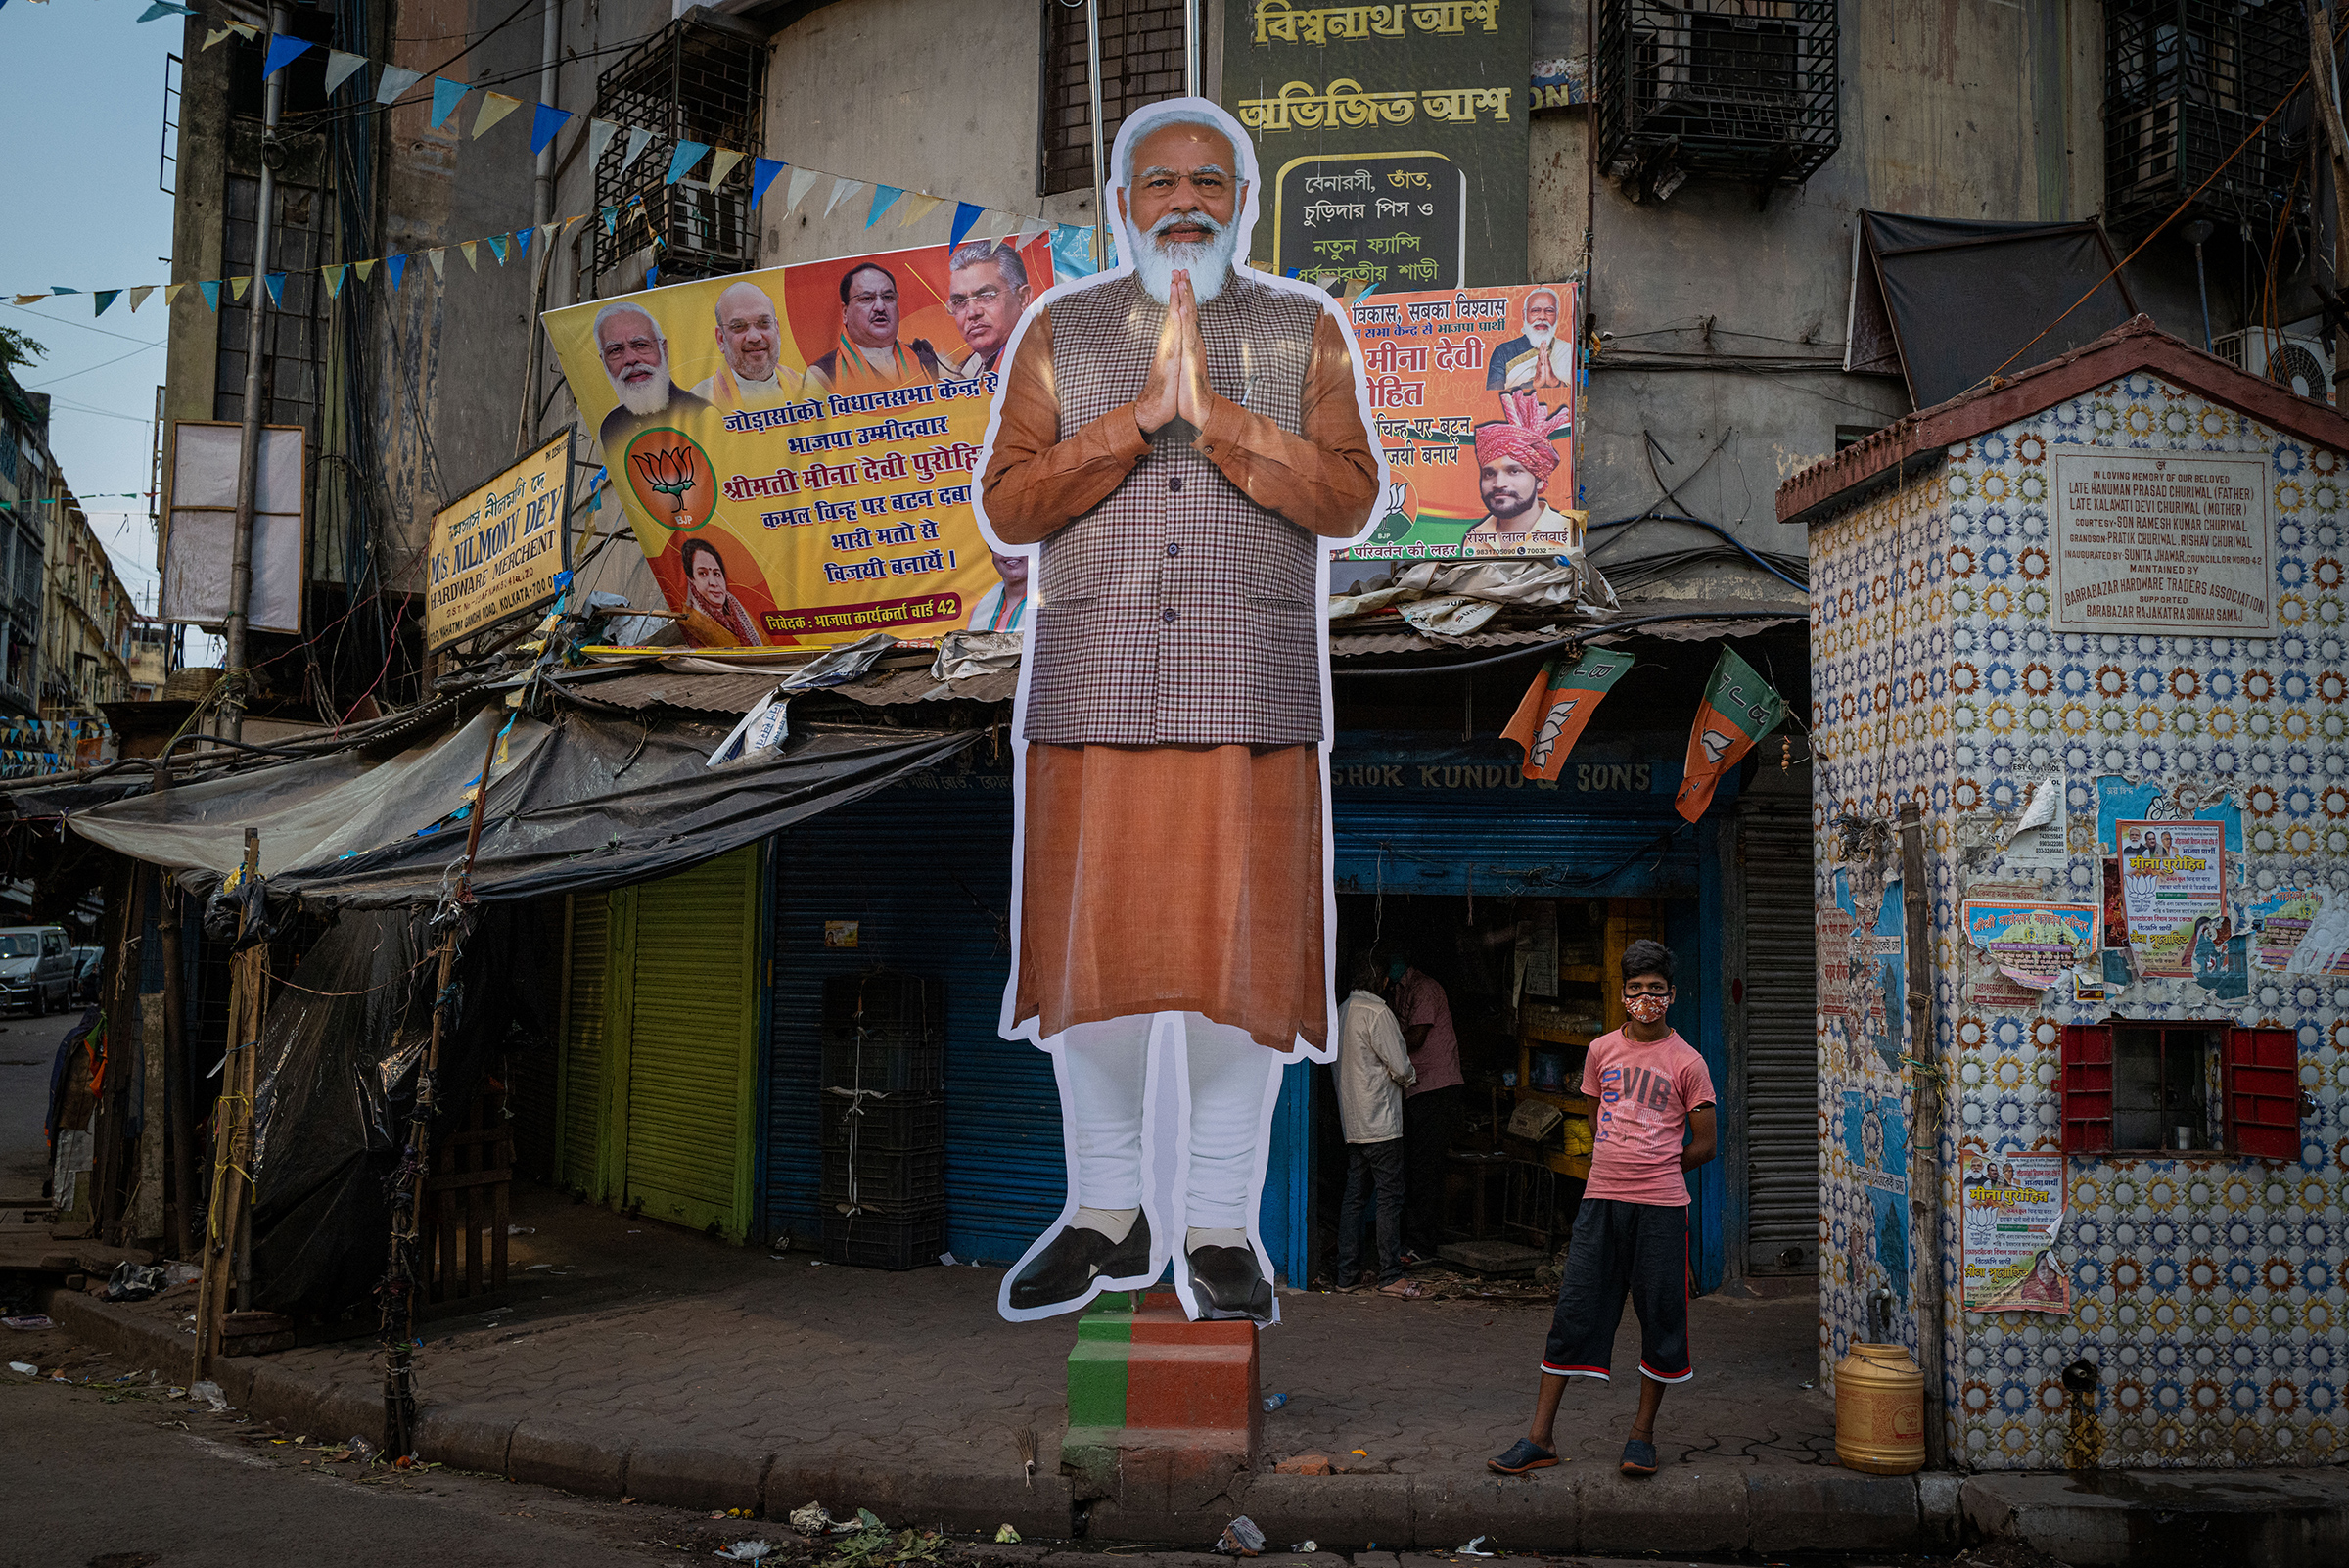 A cut-out depicting Indian Prime Minister Narendra Modi in the streets of Kolkata, in the state of West Bengal, on April 25, 2021. Voters in the state recently handed him a resounding defeat. (Robin Tutenges—Hans Lucas/Redux)